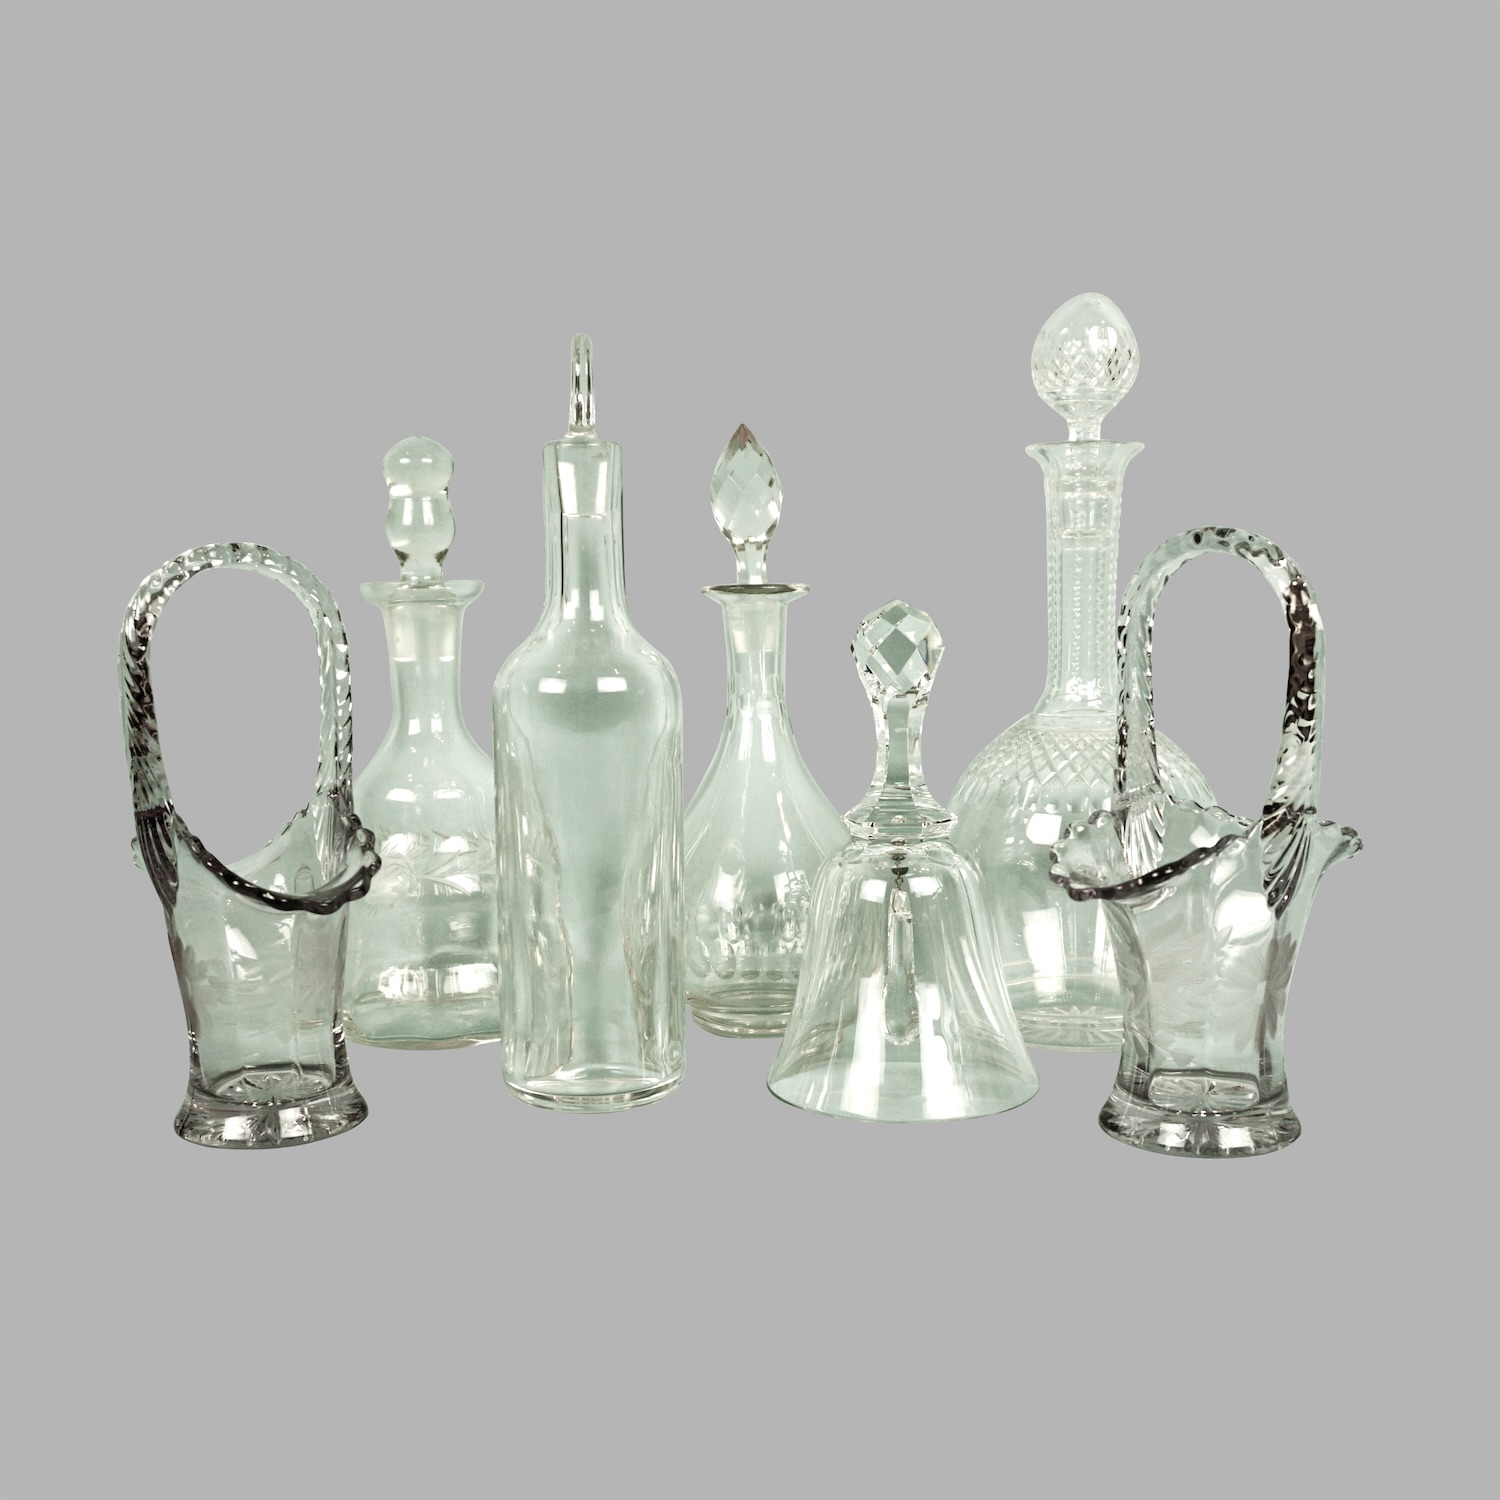 assortment-glass-objects-dinner-bell-decanters-candy-dishes-a423-2